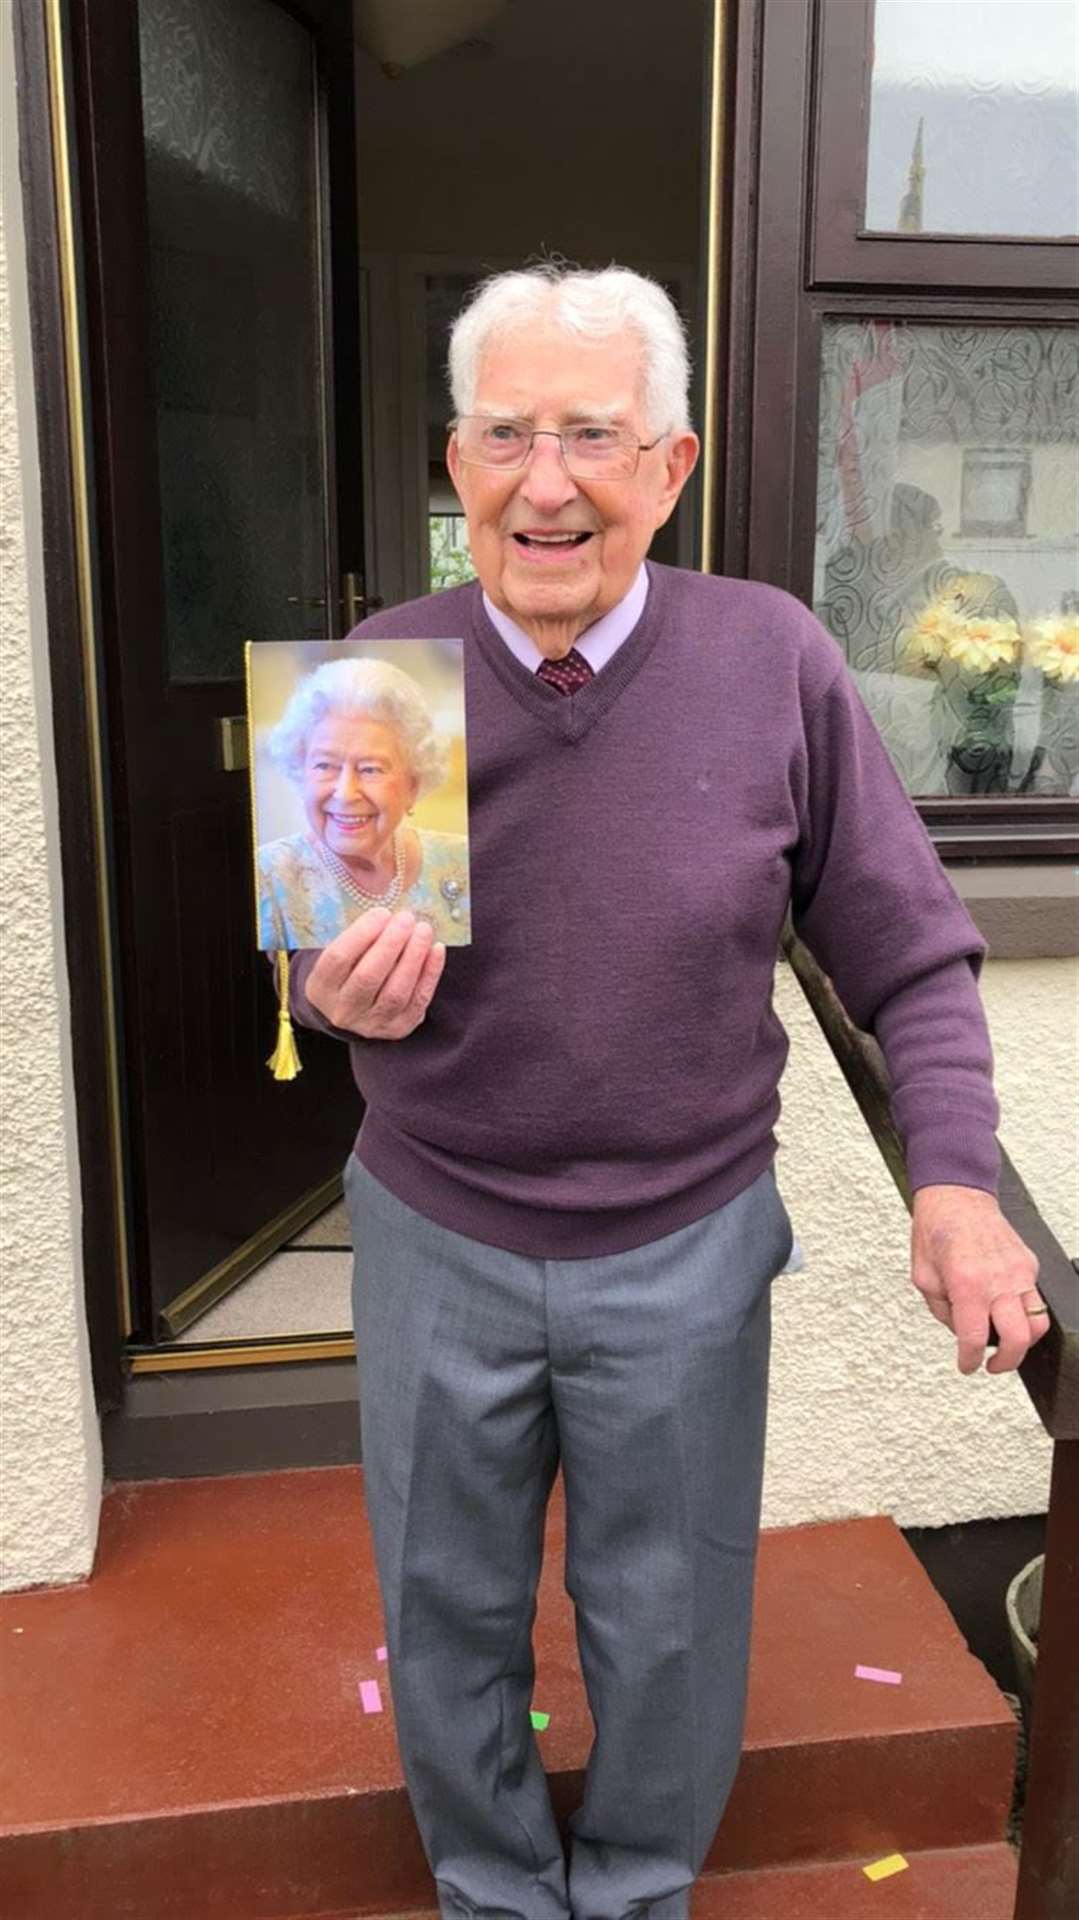 Davie Beaumont with his birthday card from the Queen.